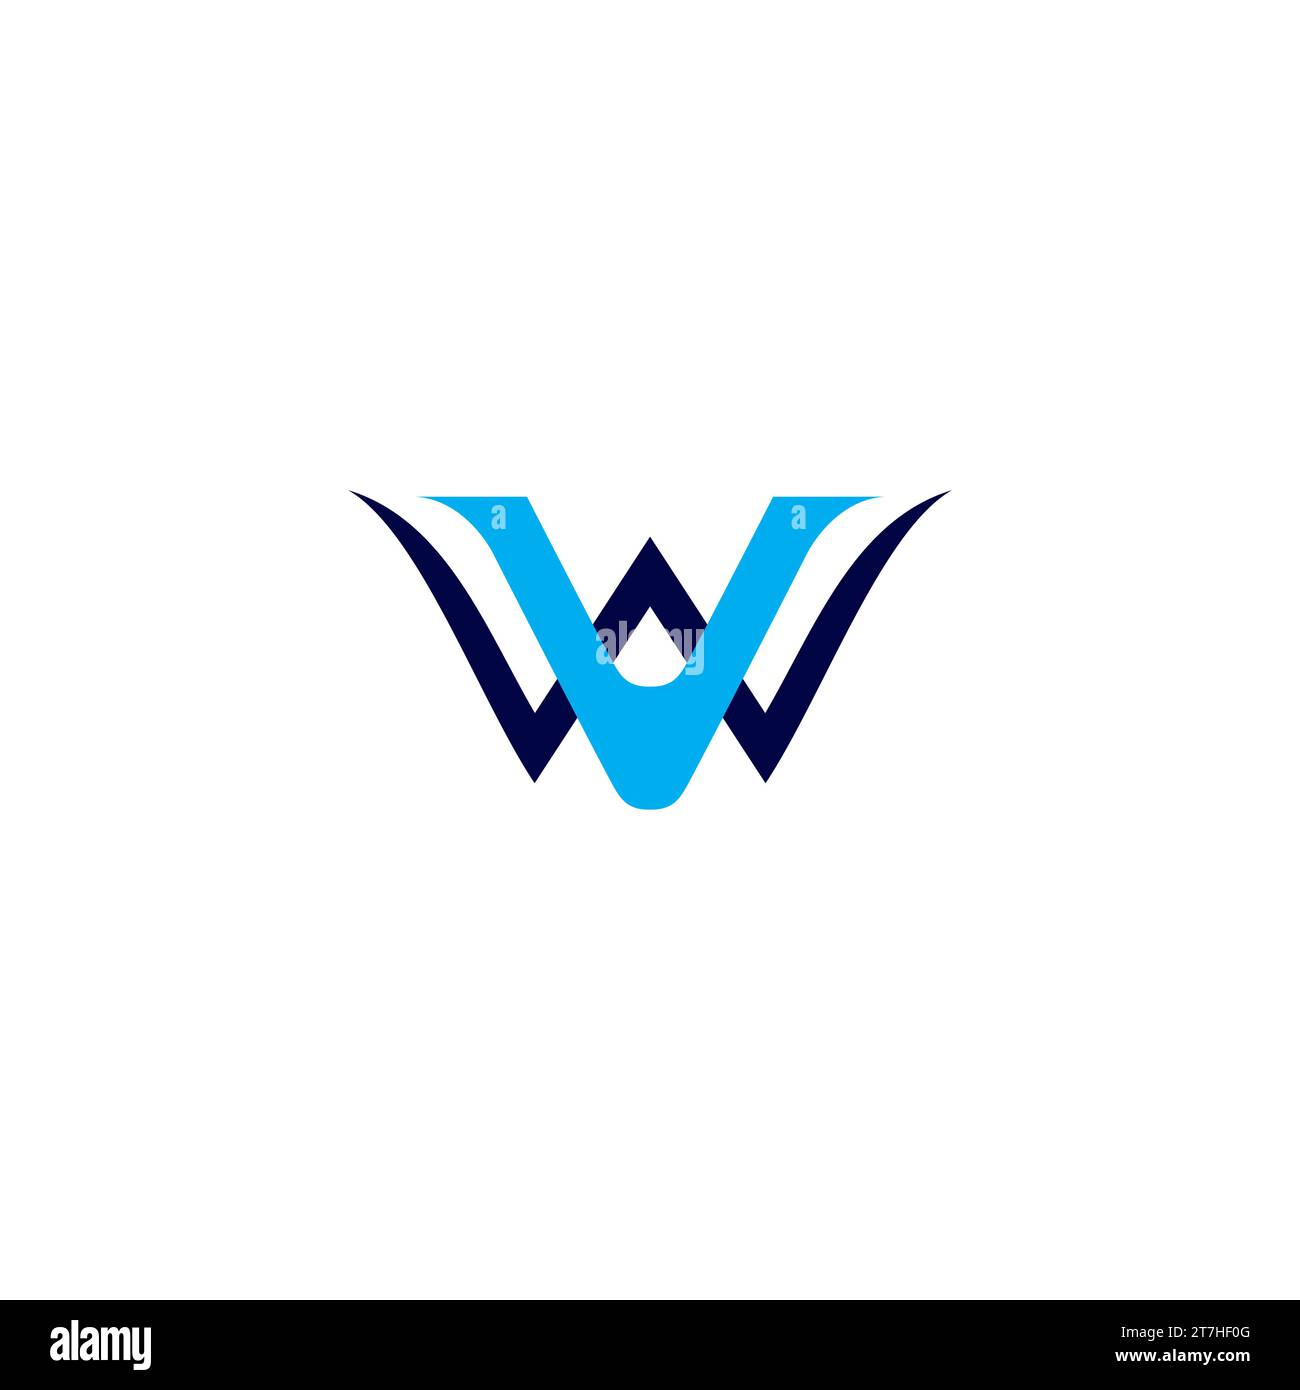 VW Logo Simple With Blue and Black Color Stock Vector